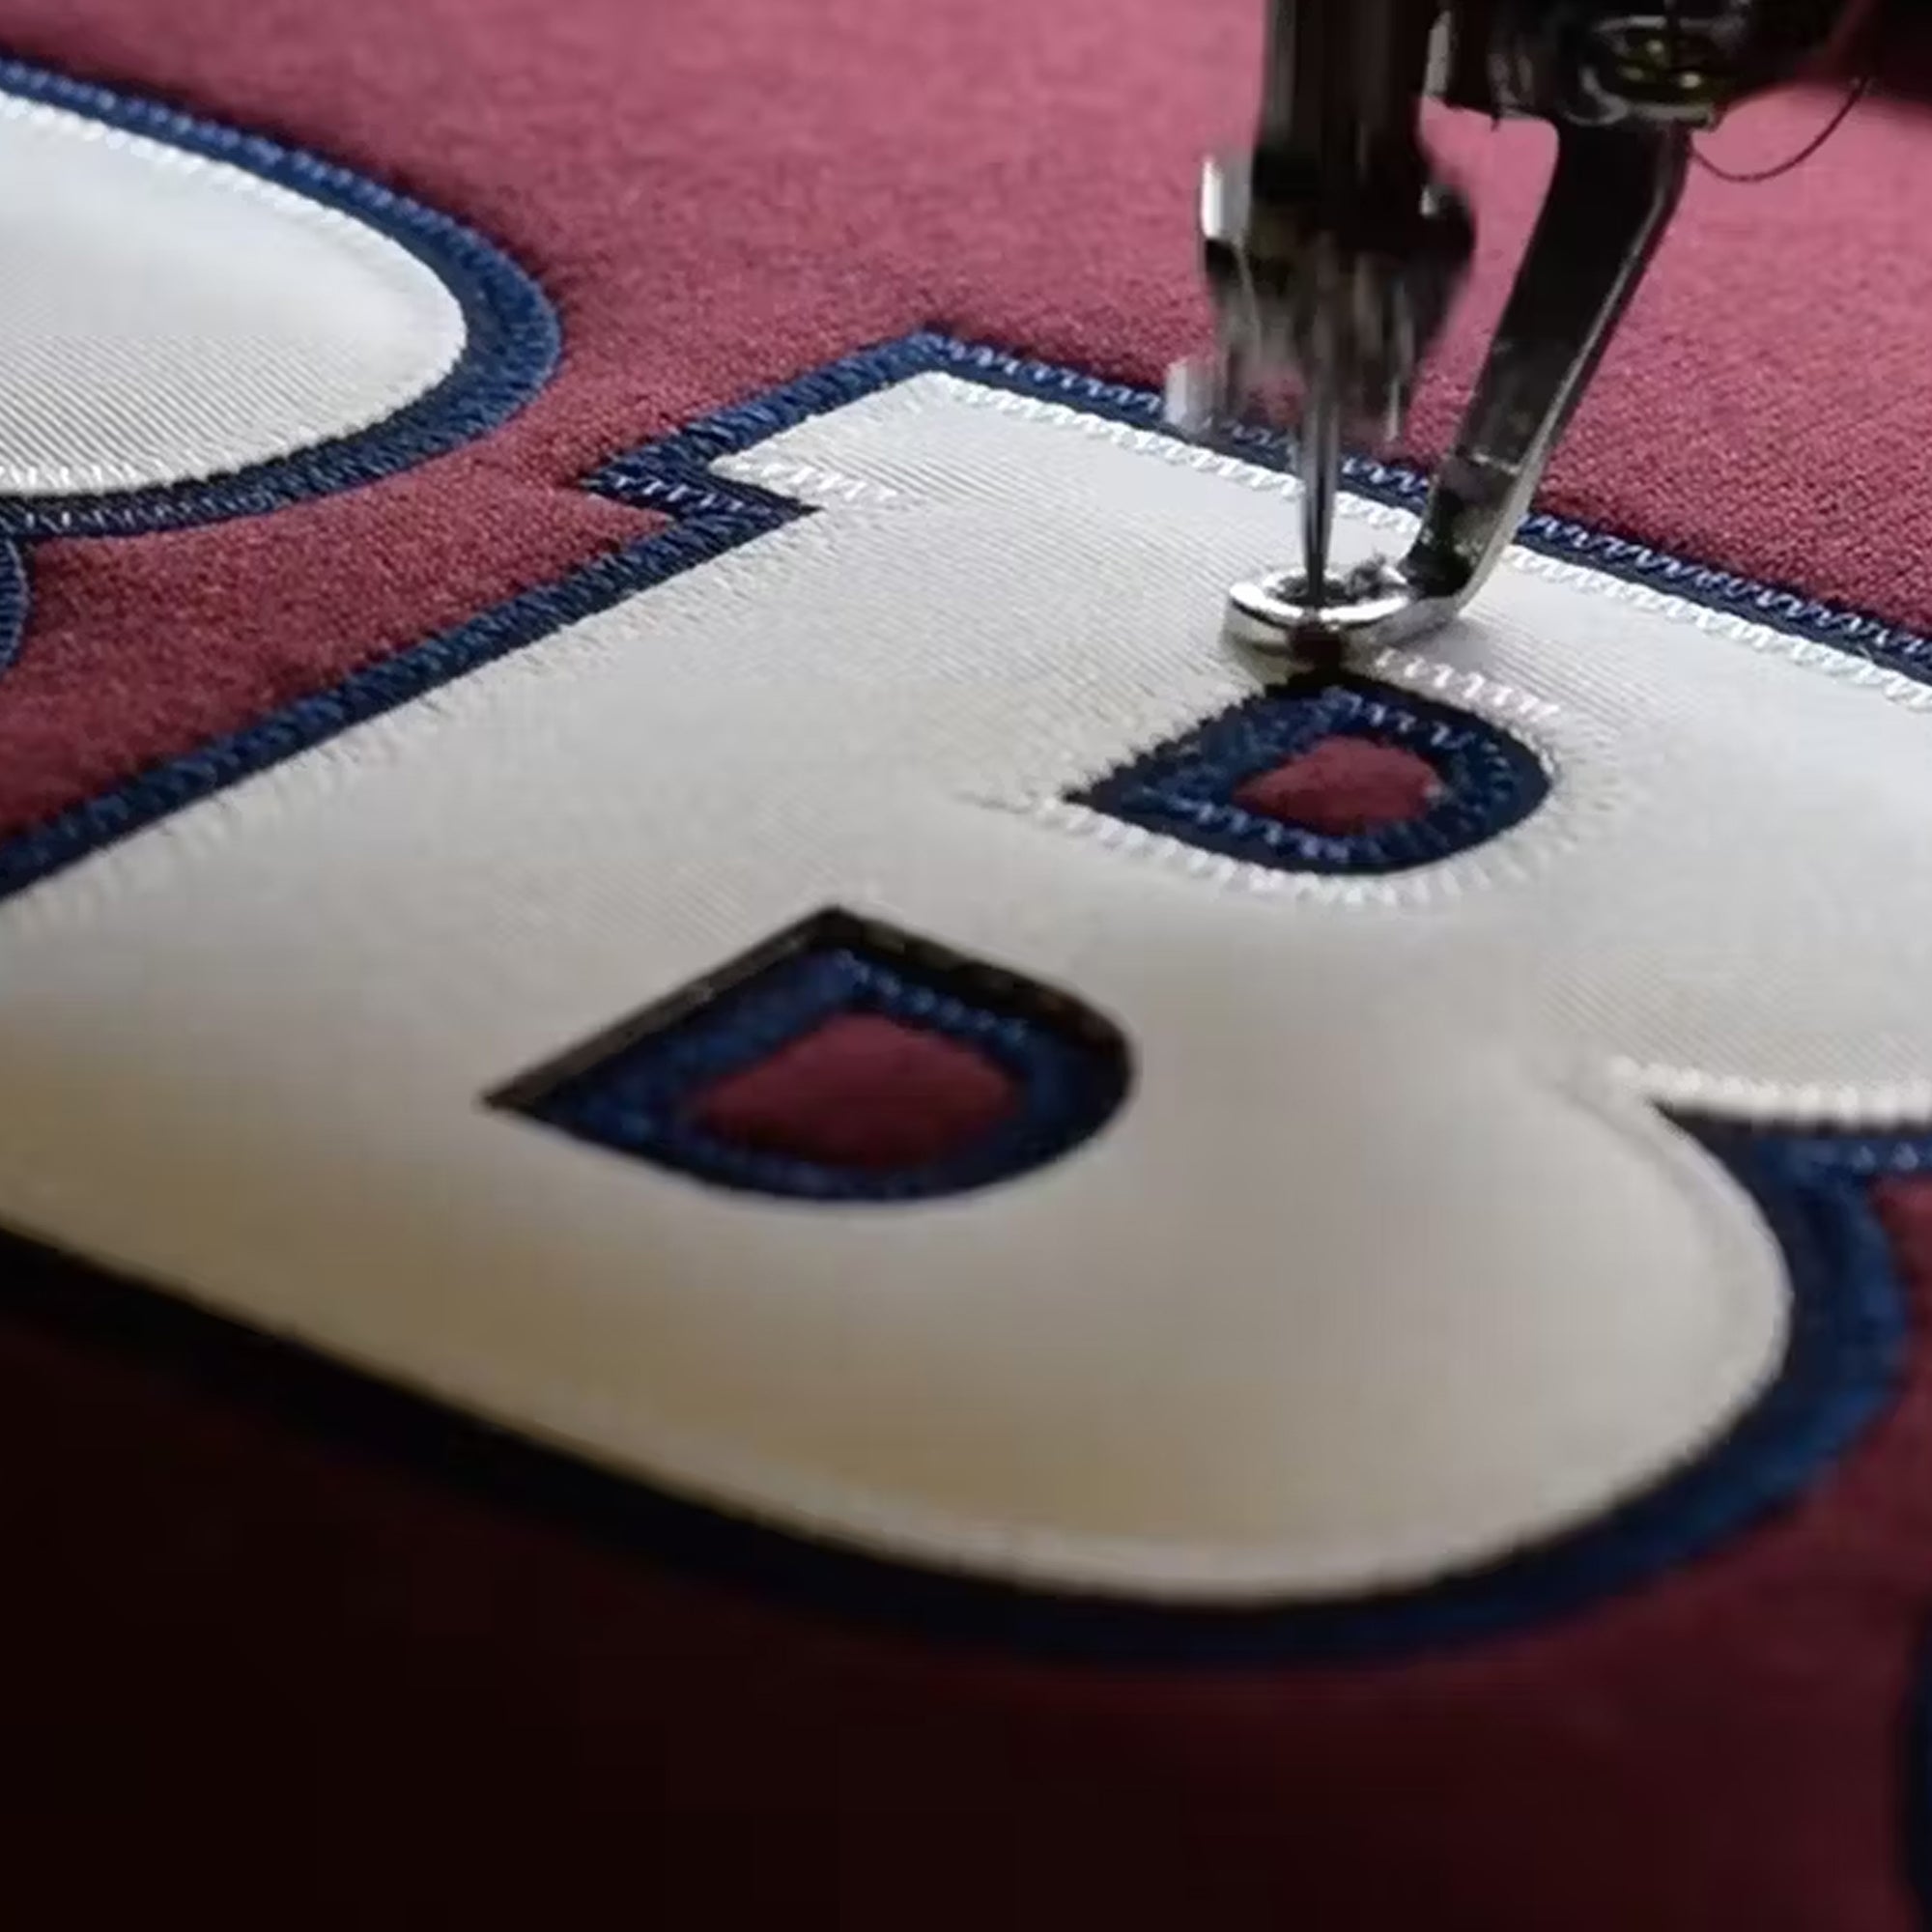 Embroidery machine stitching into a custom tackle twill B on a sweater